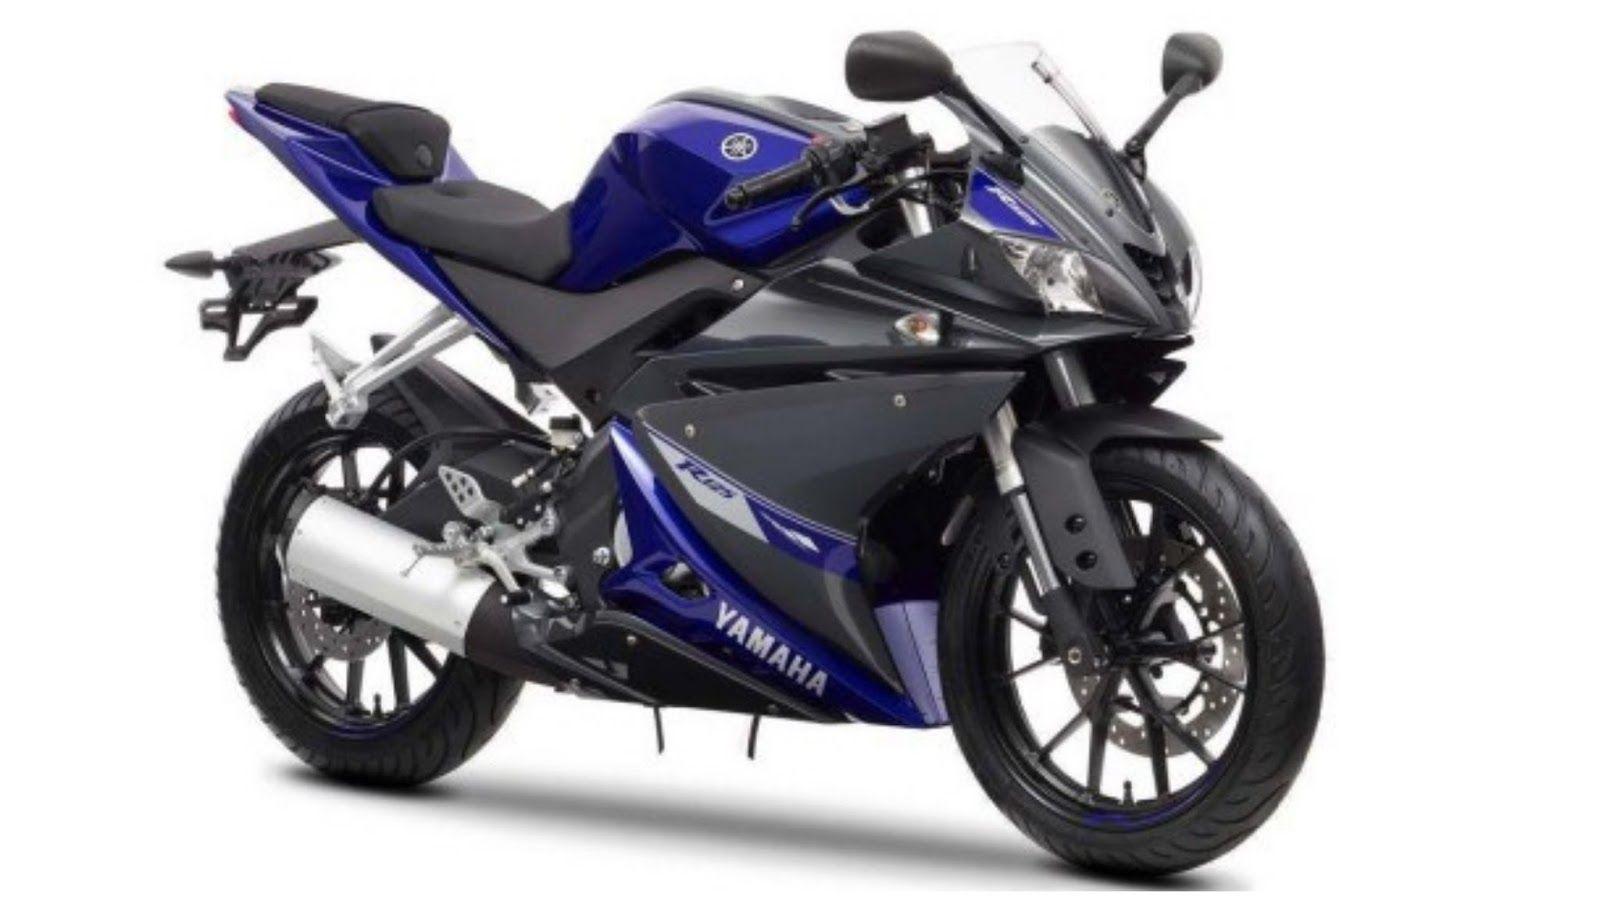 Upcoming Yamaha YZF R15 V3 price, specification, details colors